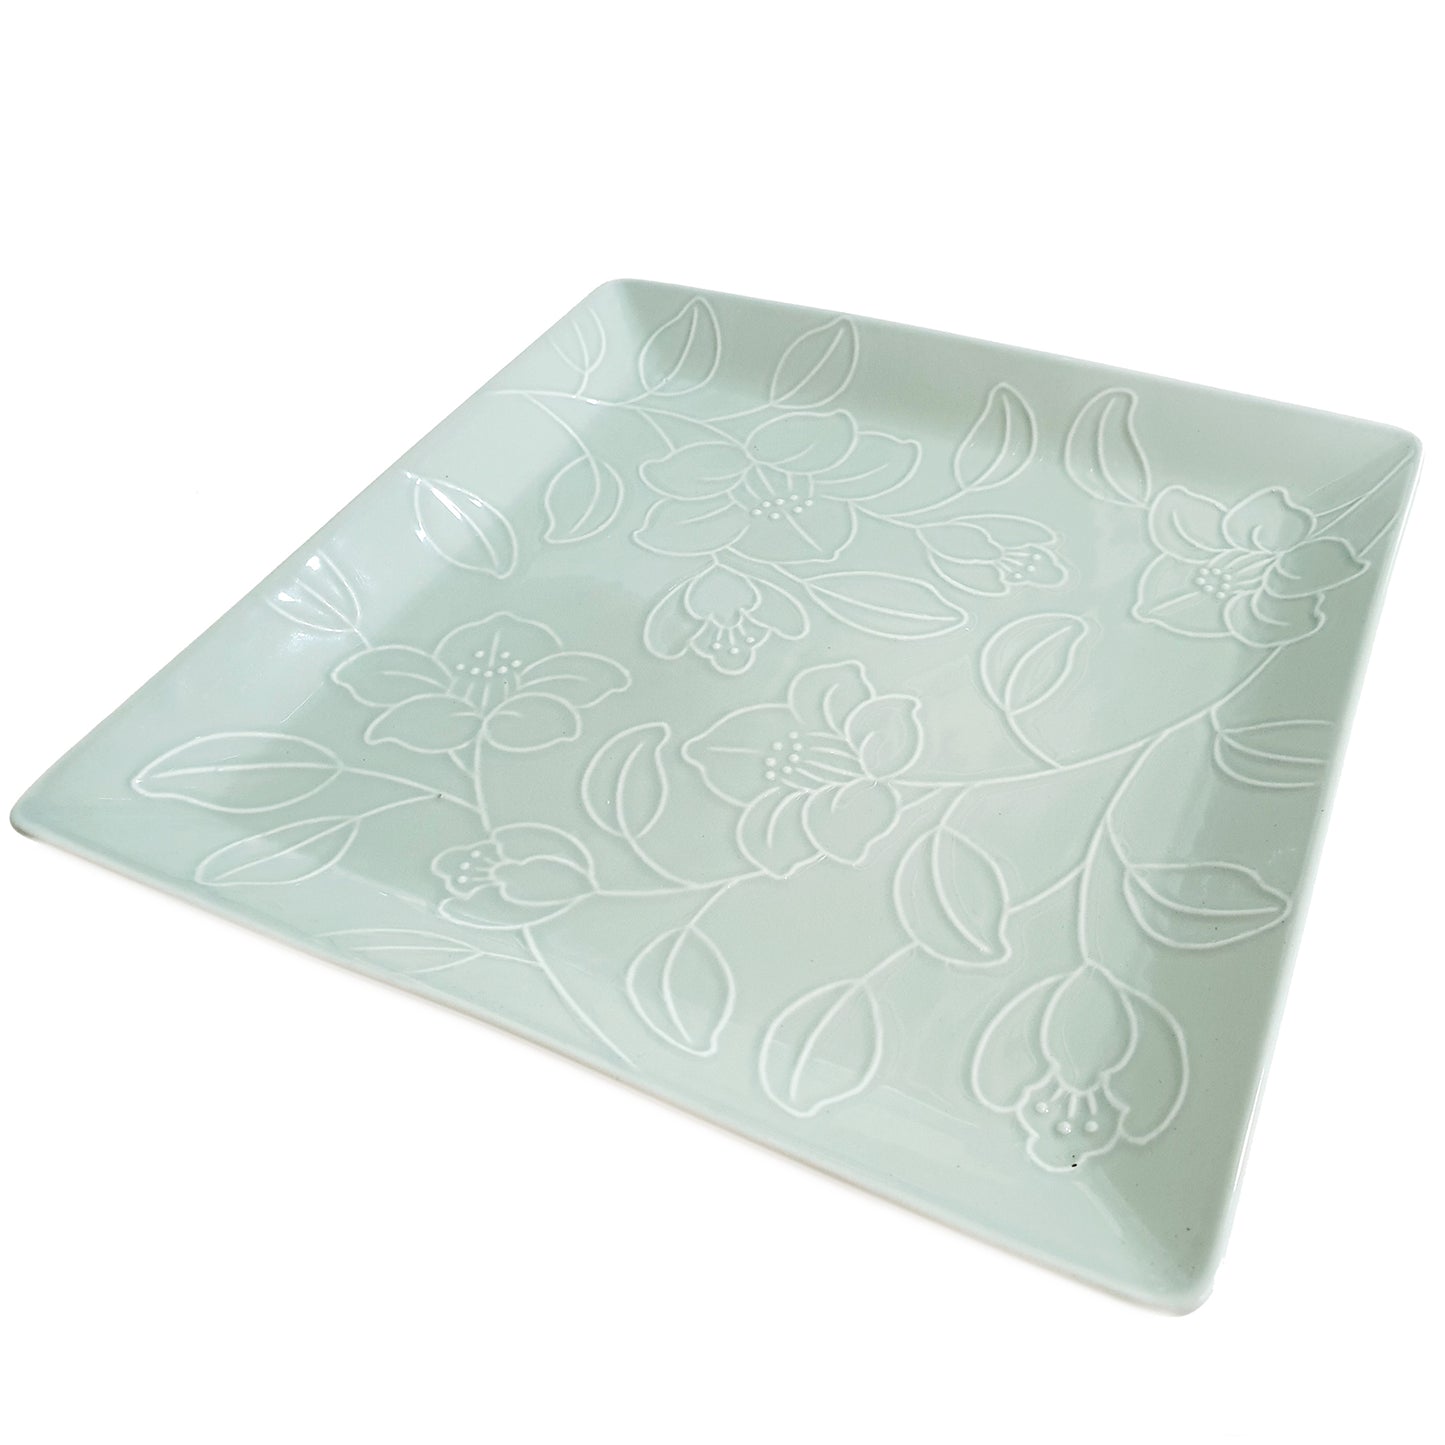 Refreshing Square Dinner/Sharing Plate 280mm (Mint Color)